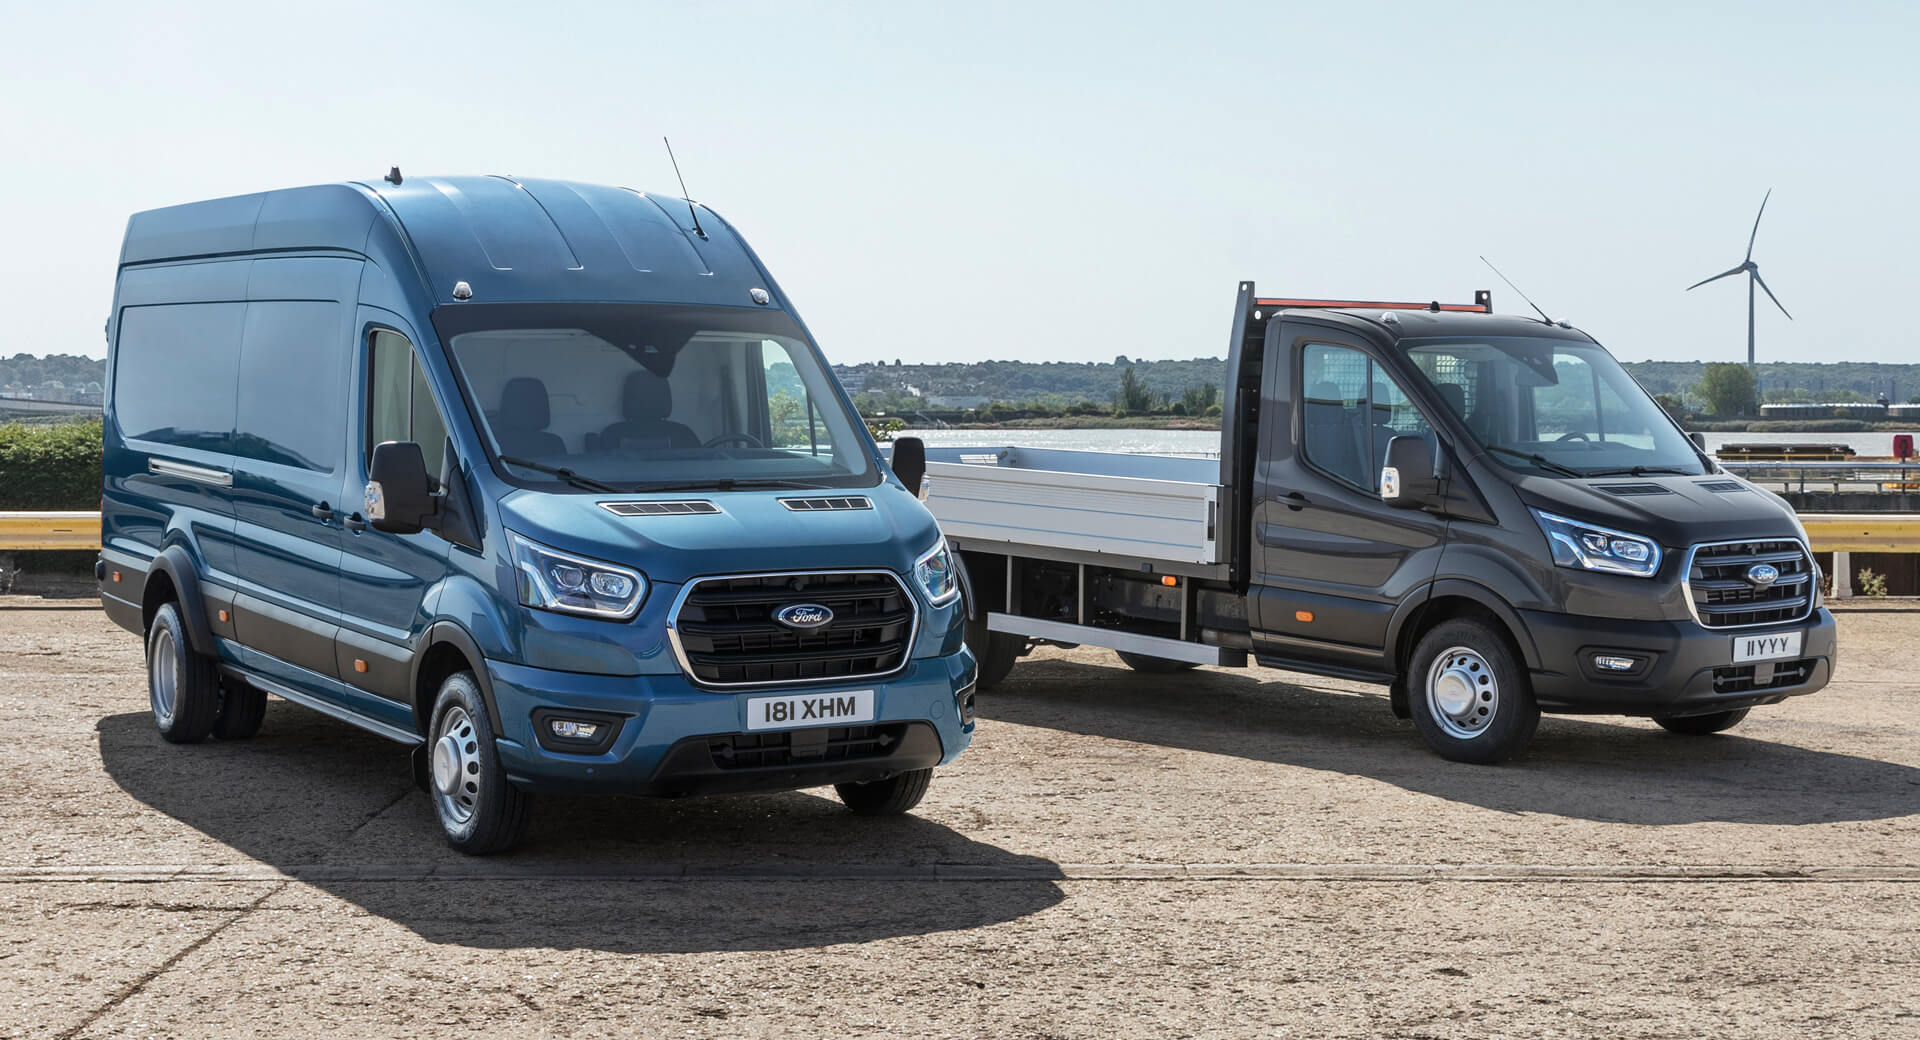 2021 Transit 5 Ton Is Ford S Strongest Van Ever Carscoops